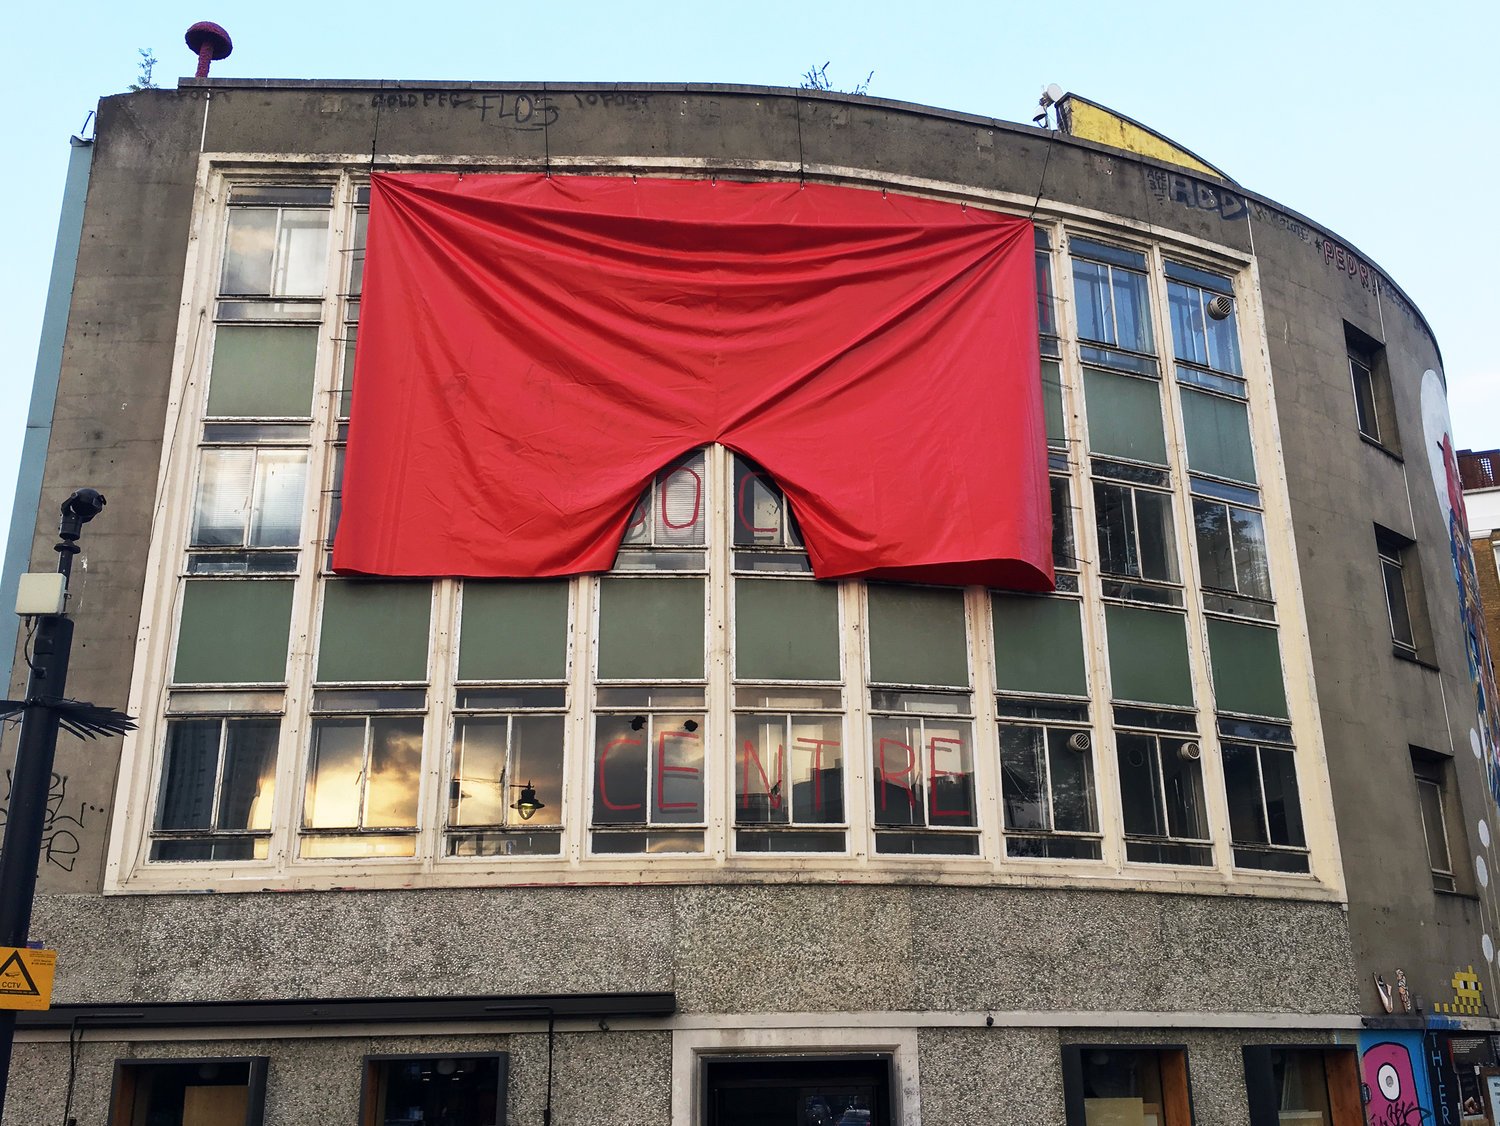 London gallery joins Czech anti-populist rebellion with public red pants protest